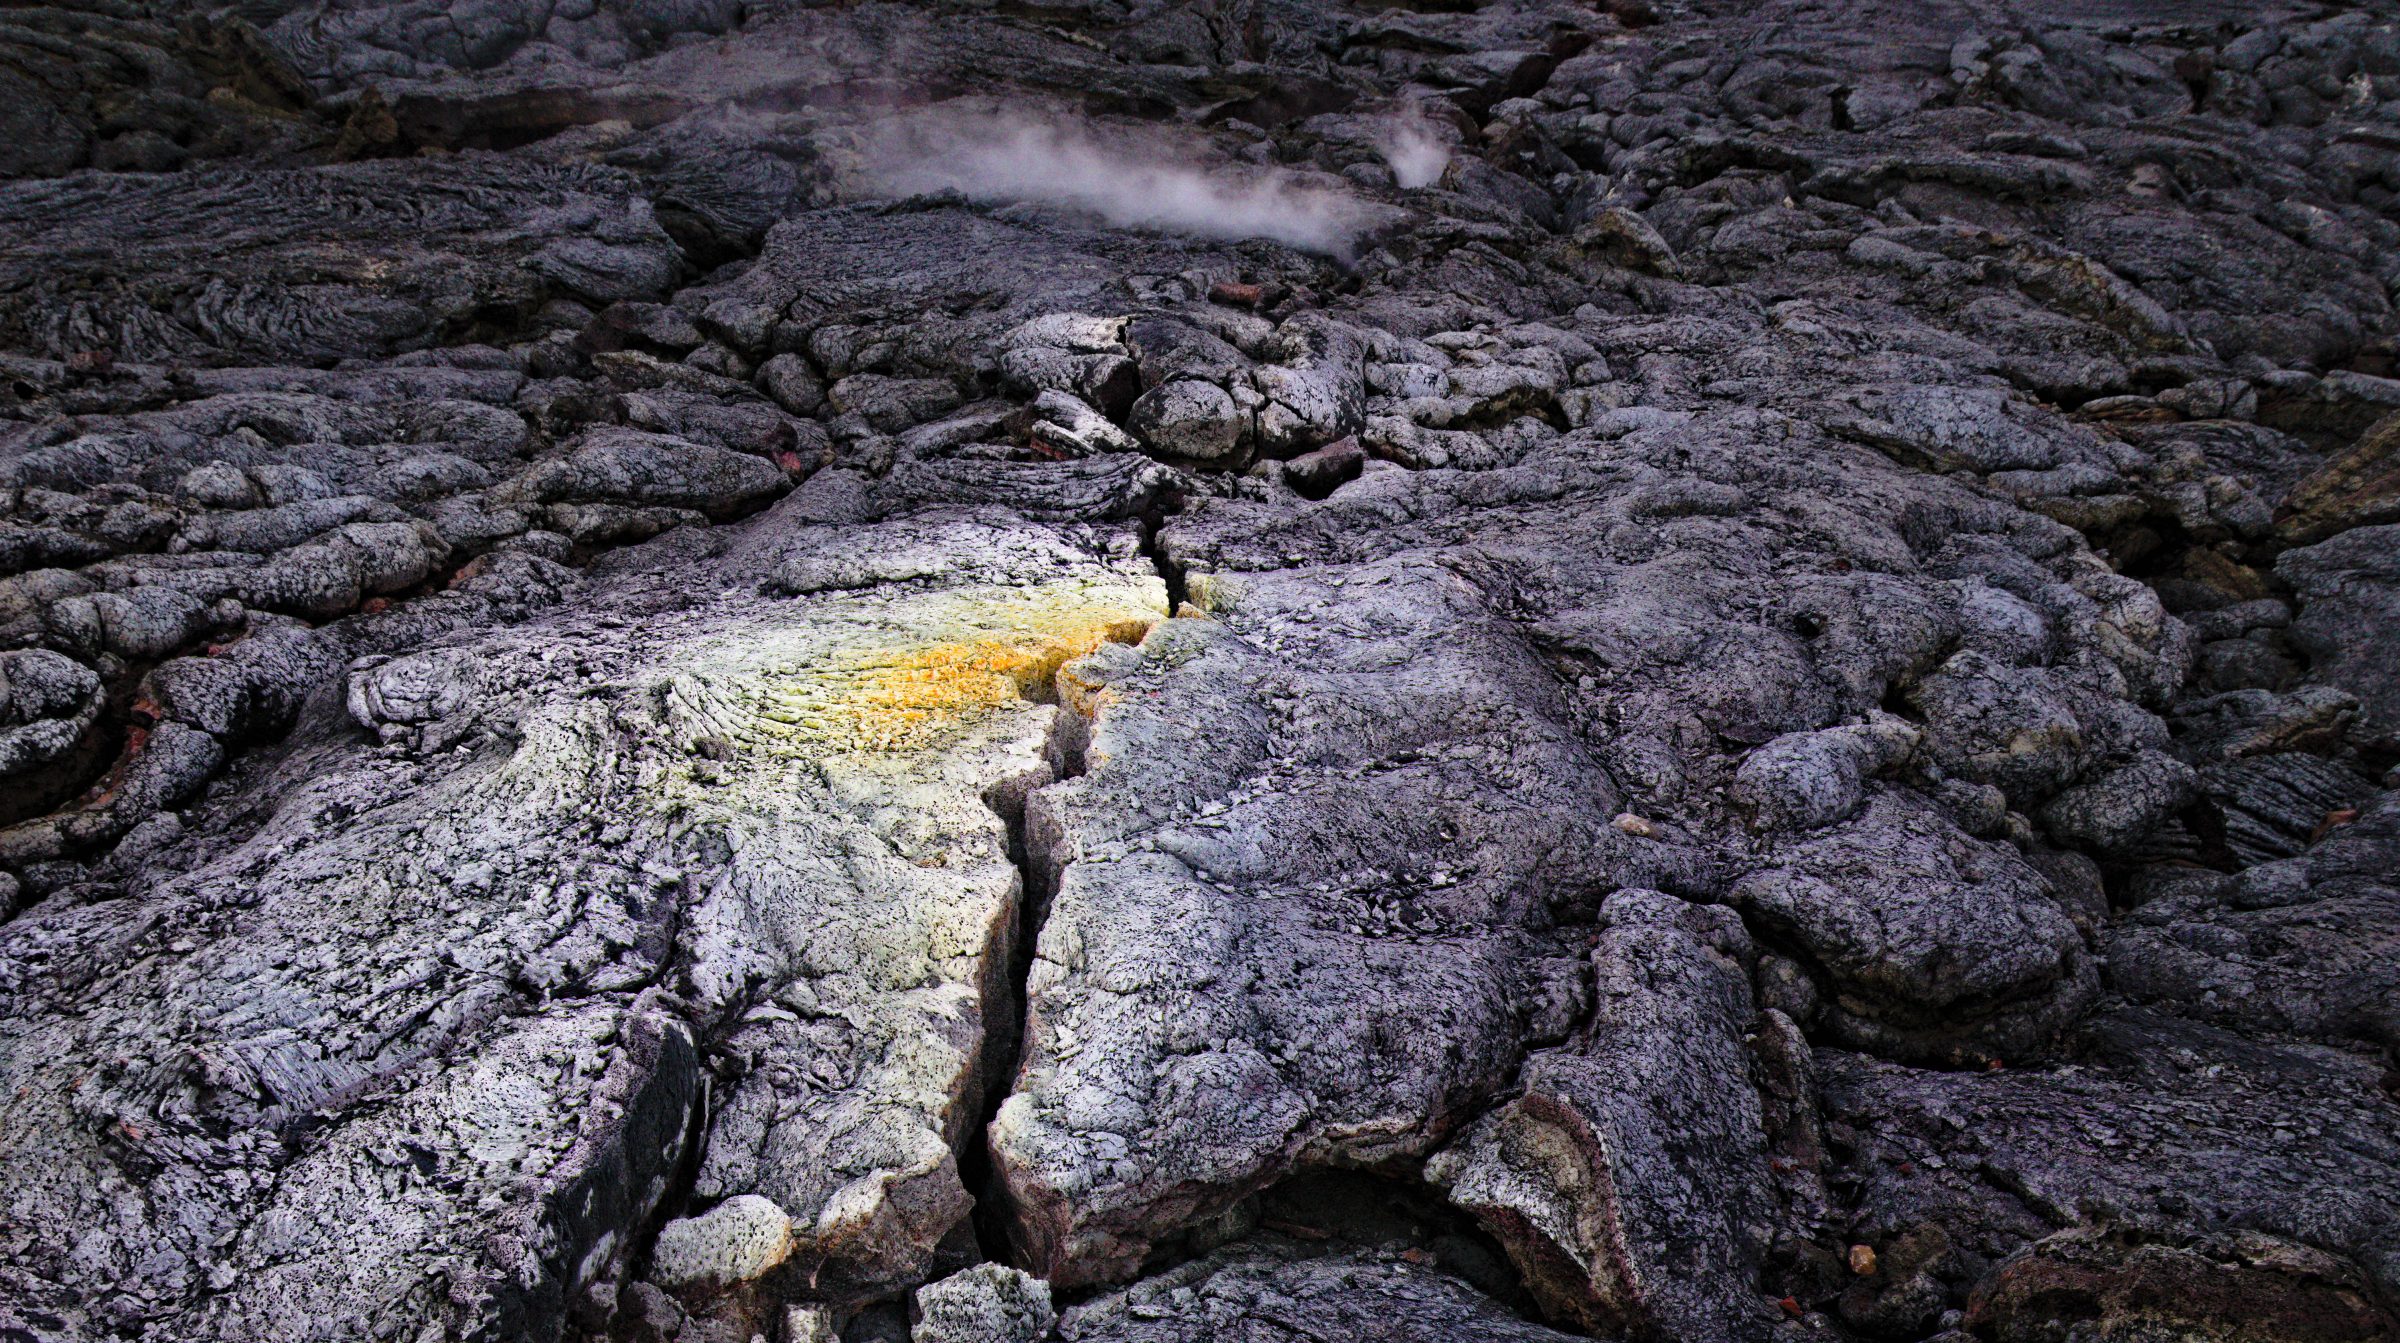 Craters, volcanoes and lava